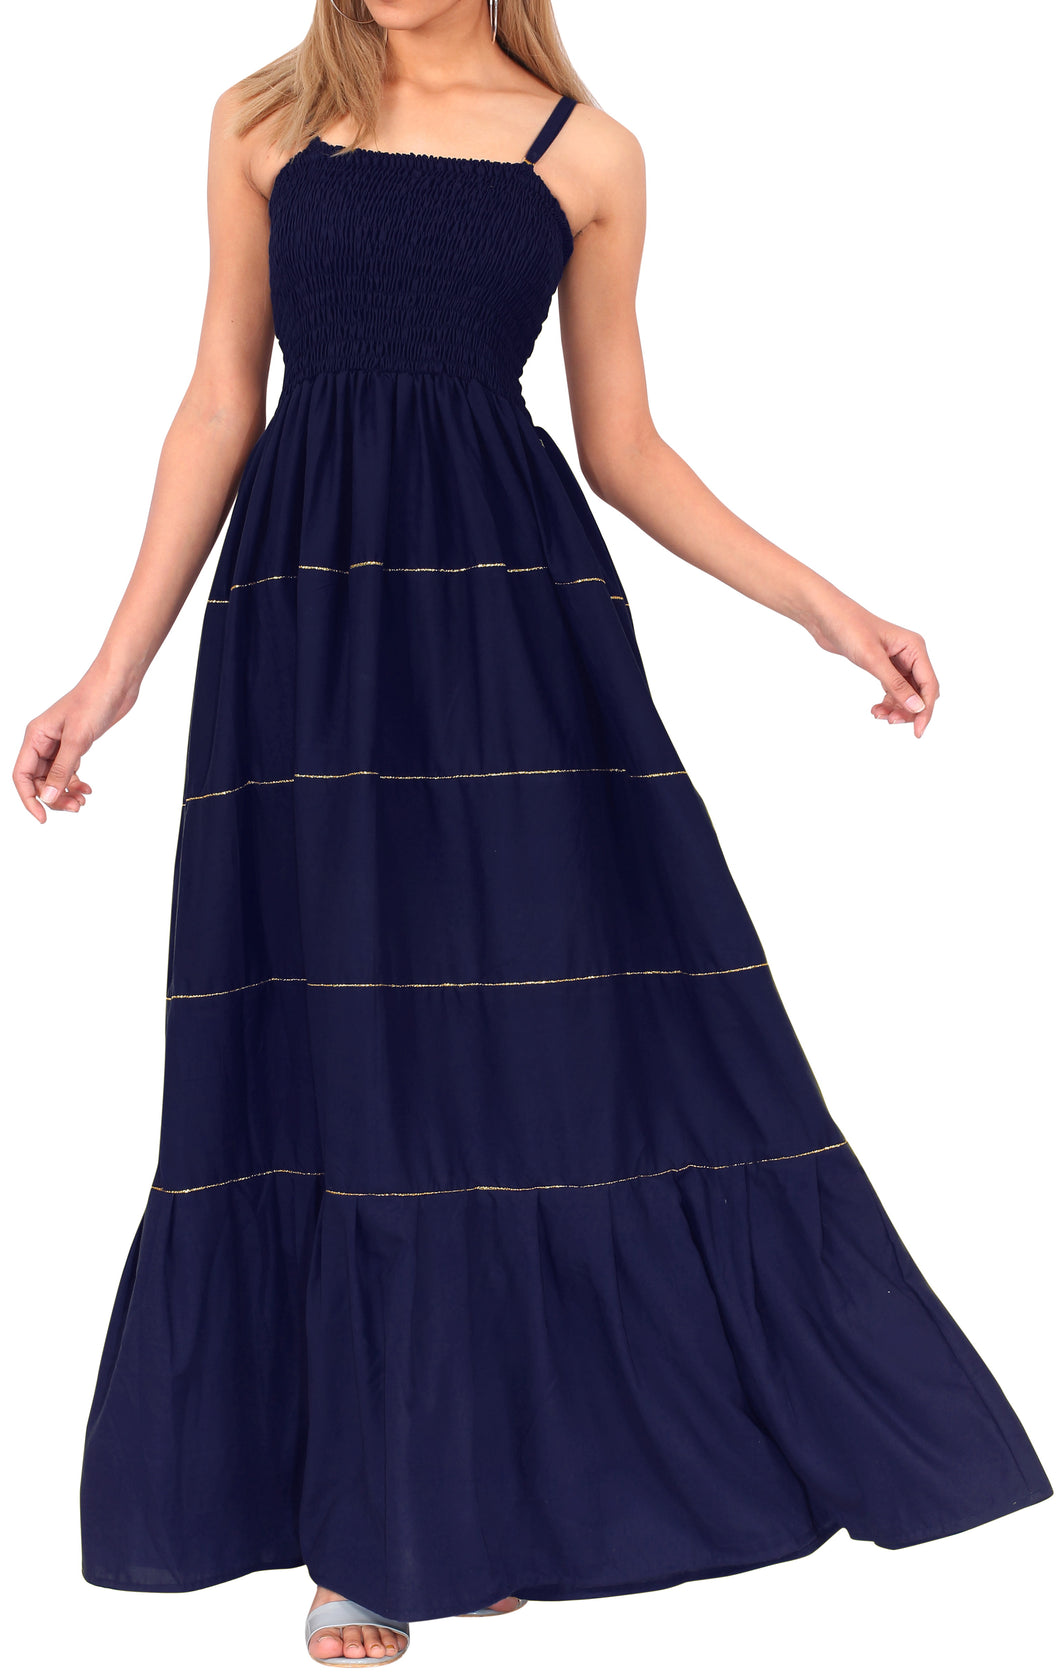 LA LEELA Long Maxi Solid Color Strappy Tube Dress For Women Everyday Casual And Chic Housewear Outfit With Elegant Golden Lining